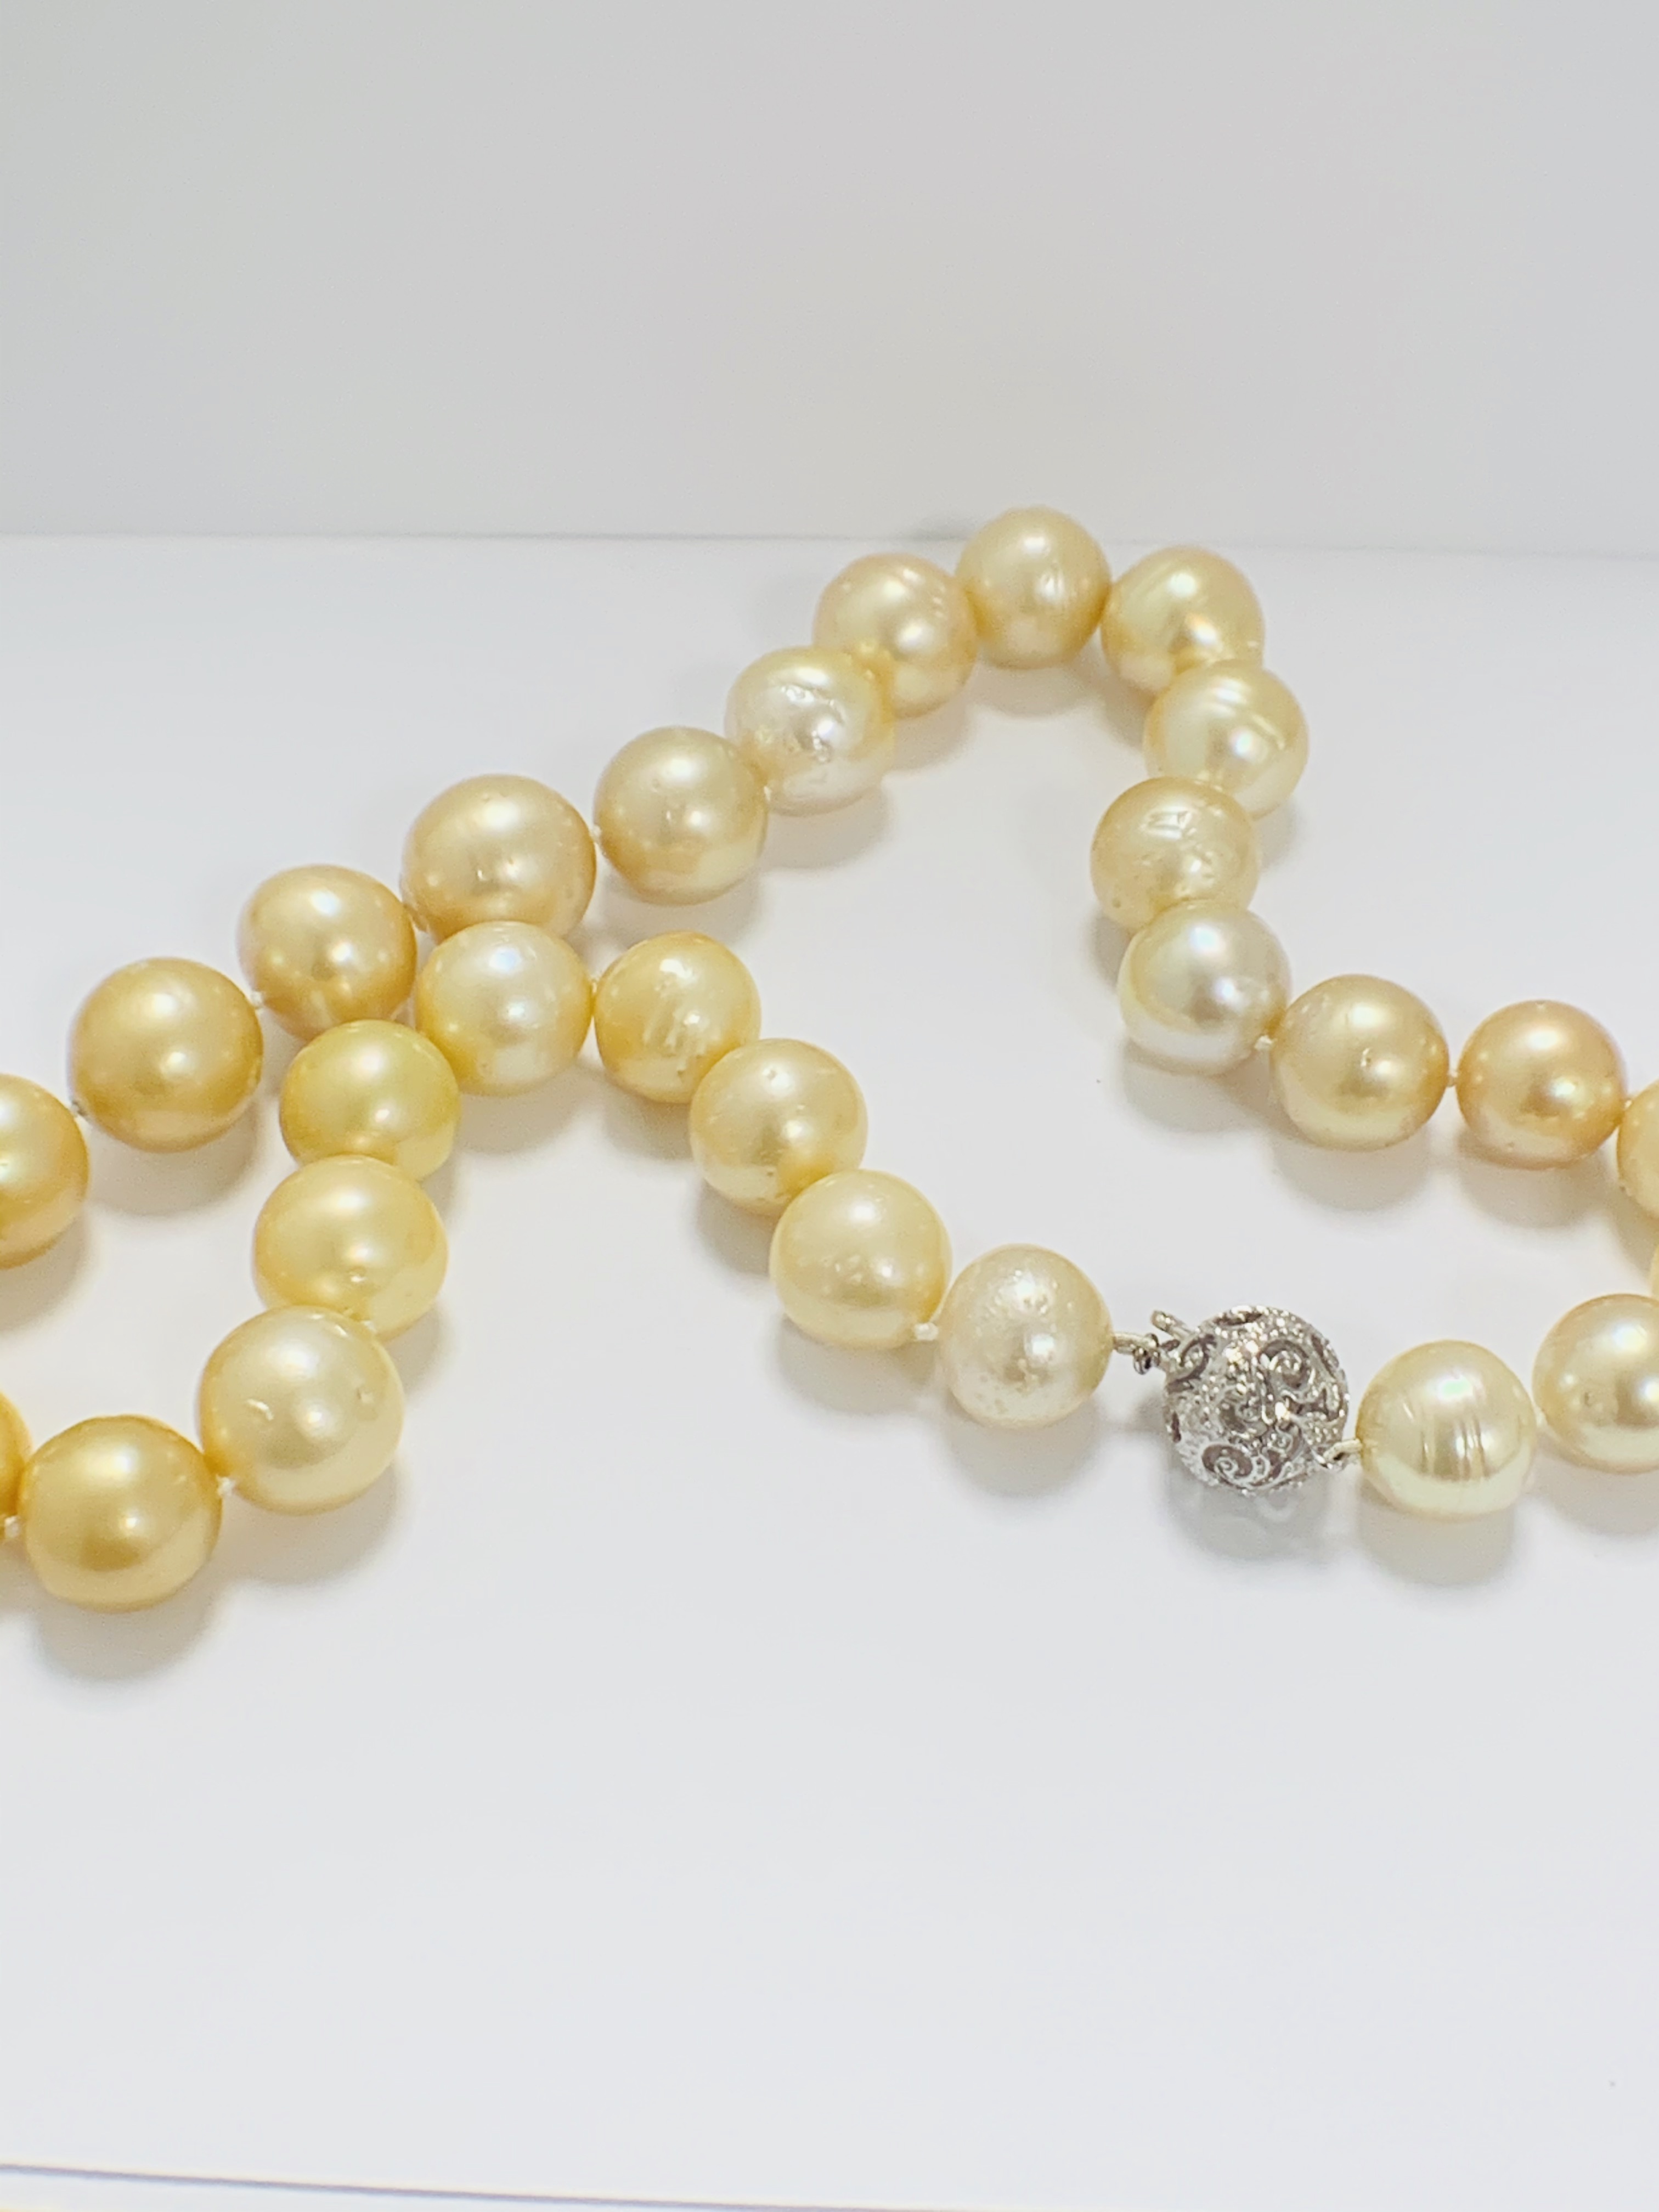 Pearl and Diamond necklace strand featuring, 33 South Sea Pearls, with 4 round brilliant cut Diamond - Image 5 of 13